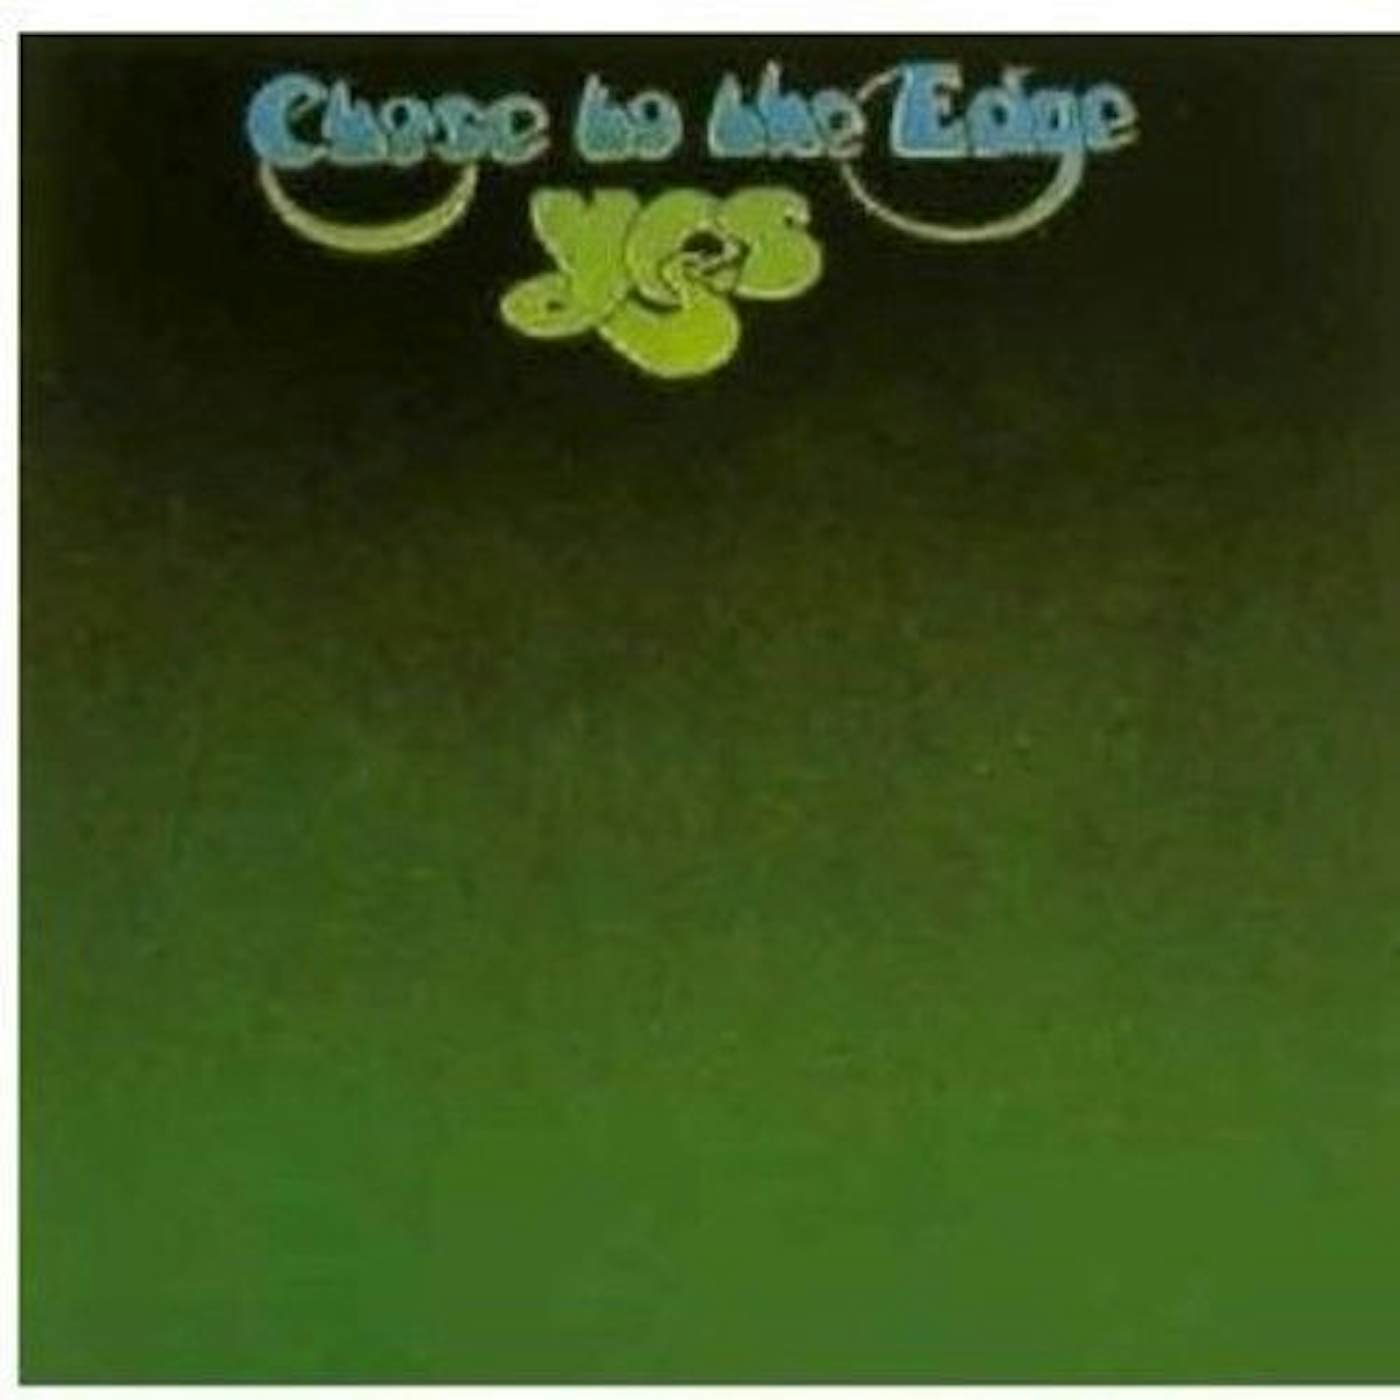 Yes Close To The Edge Vinyl Record